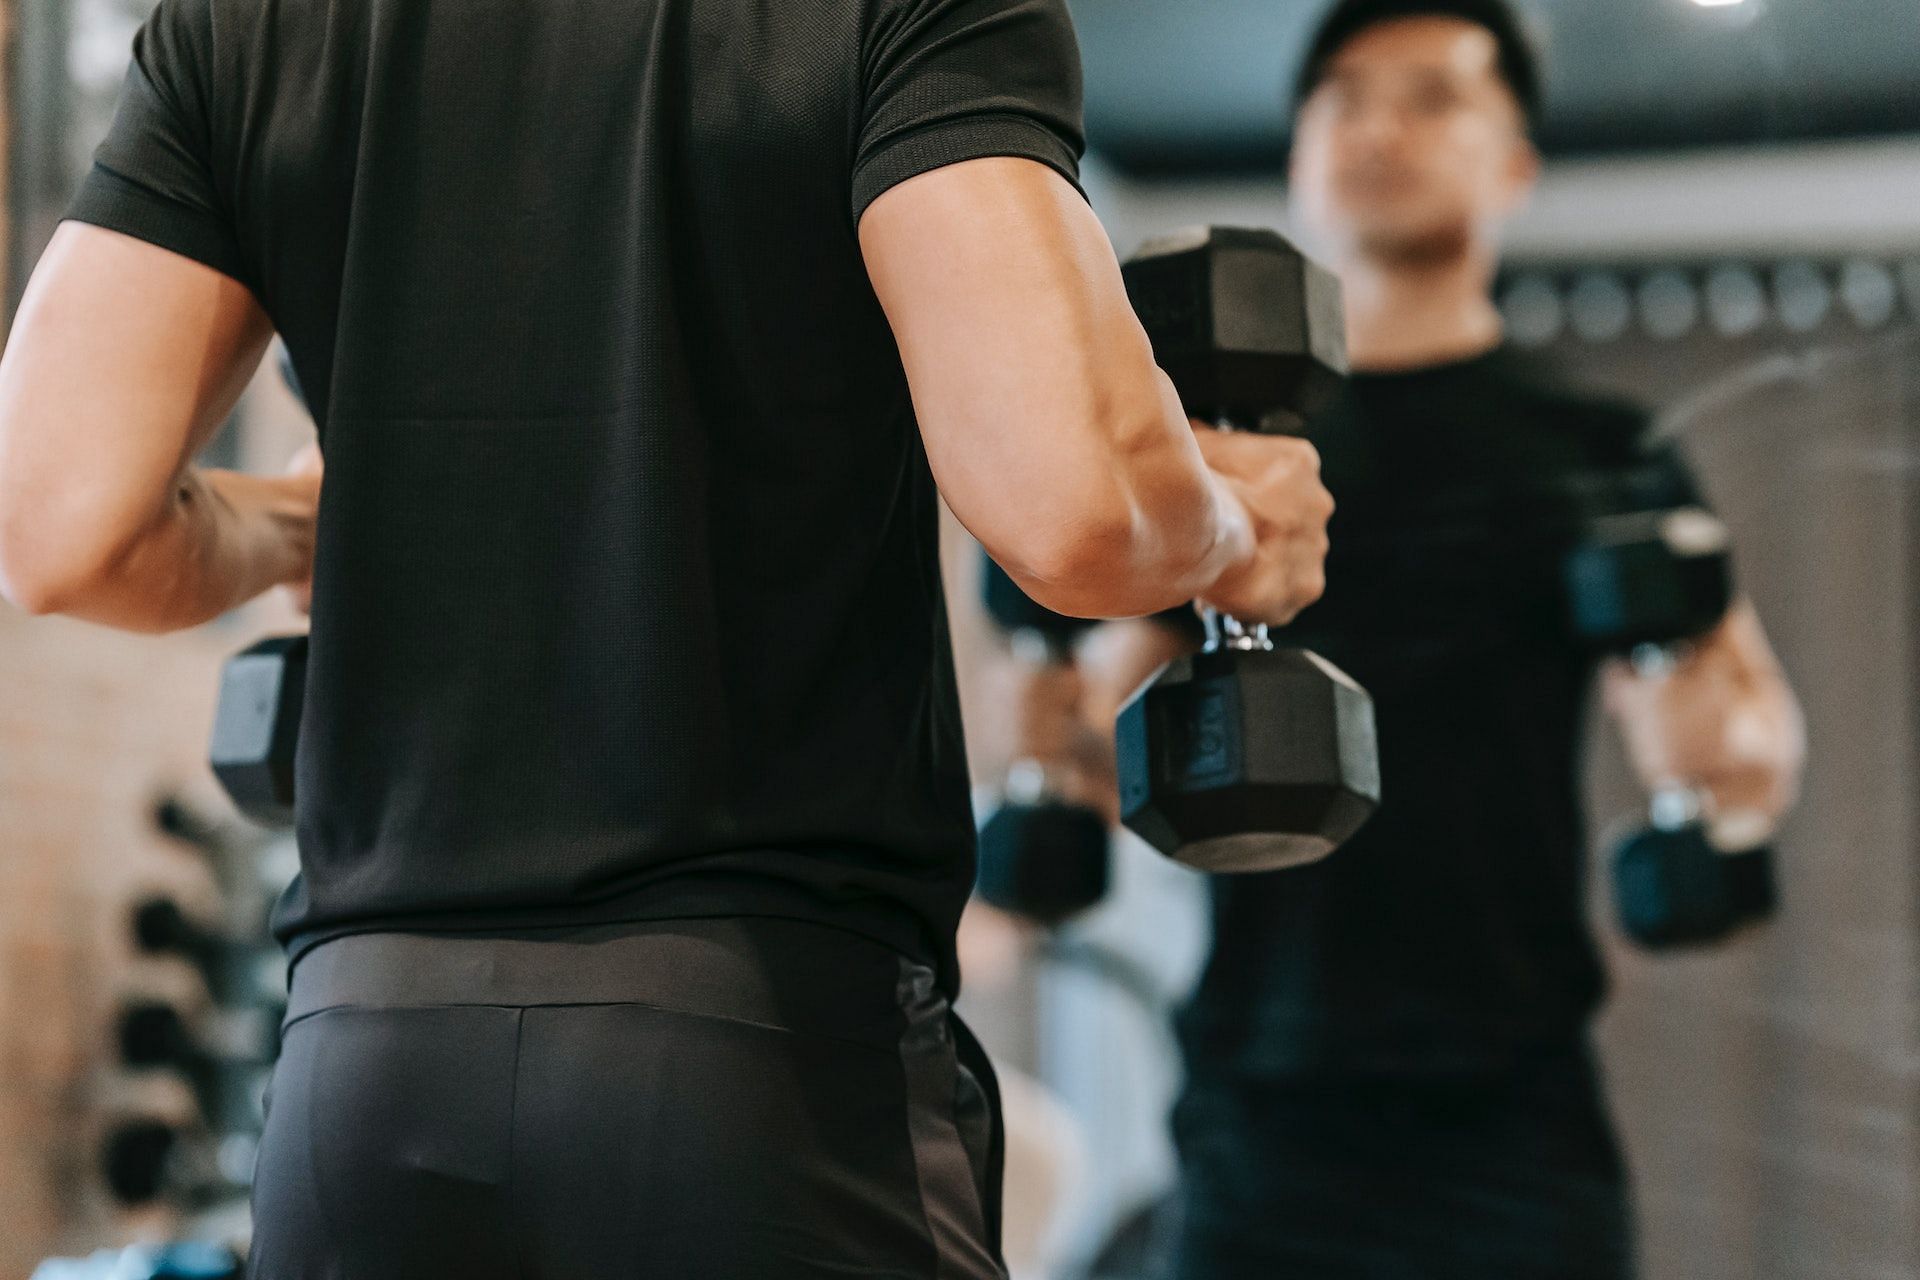 To do the incline dumbbell curl exercise, you need a pair of dumbbells. (Image via Pexels/Andres Ayrton)